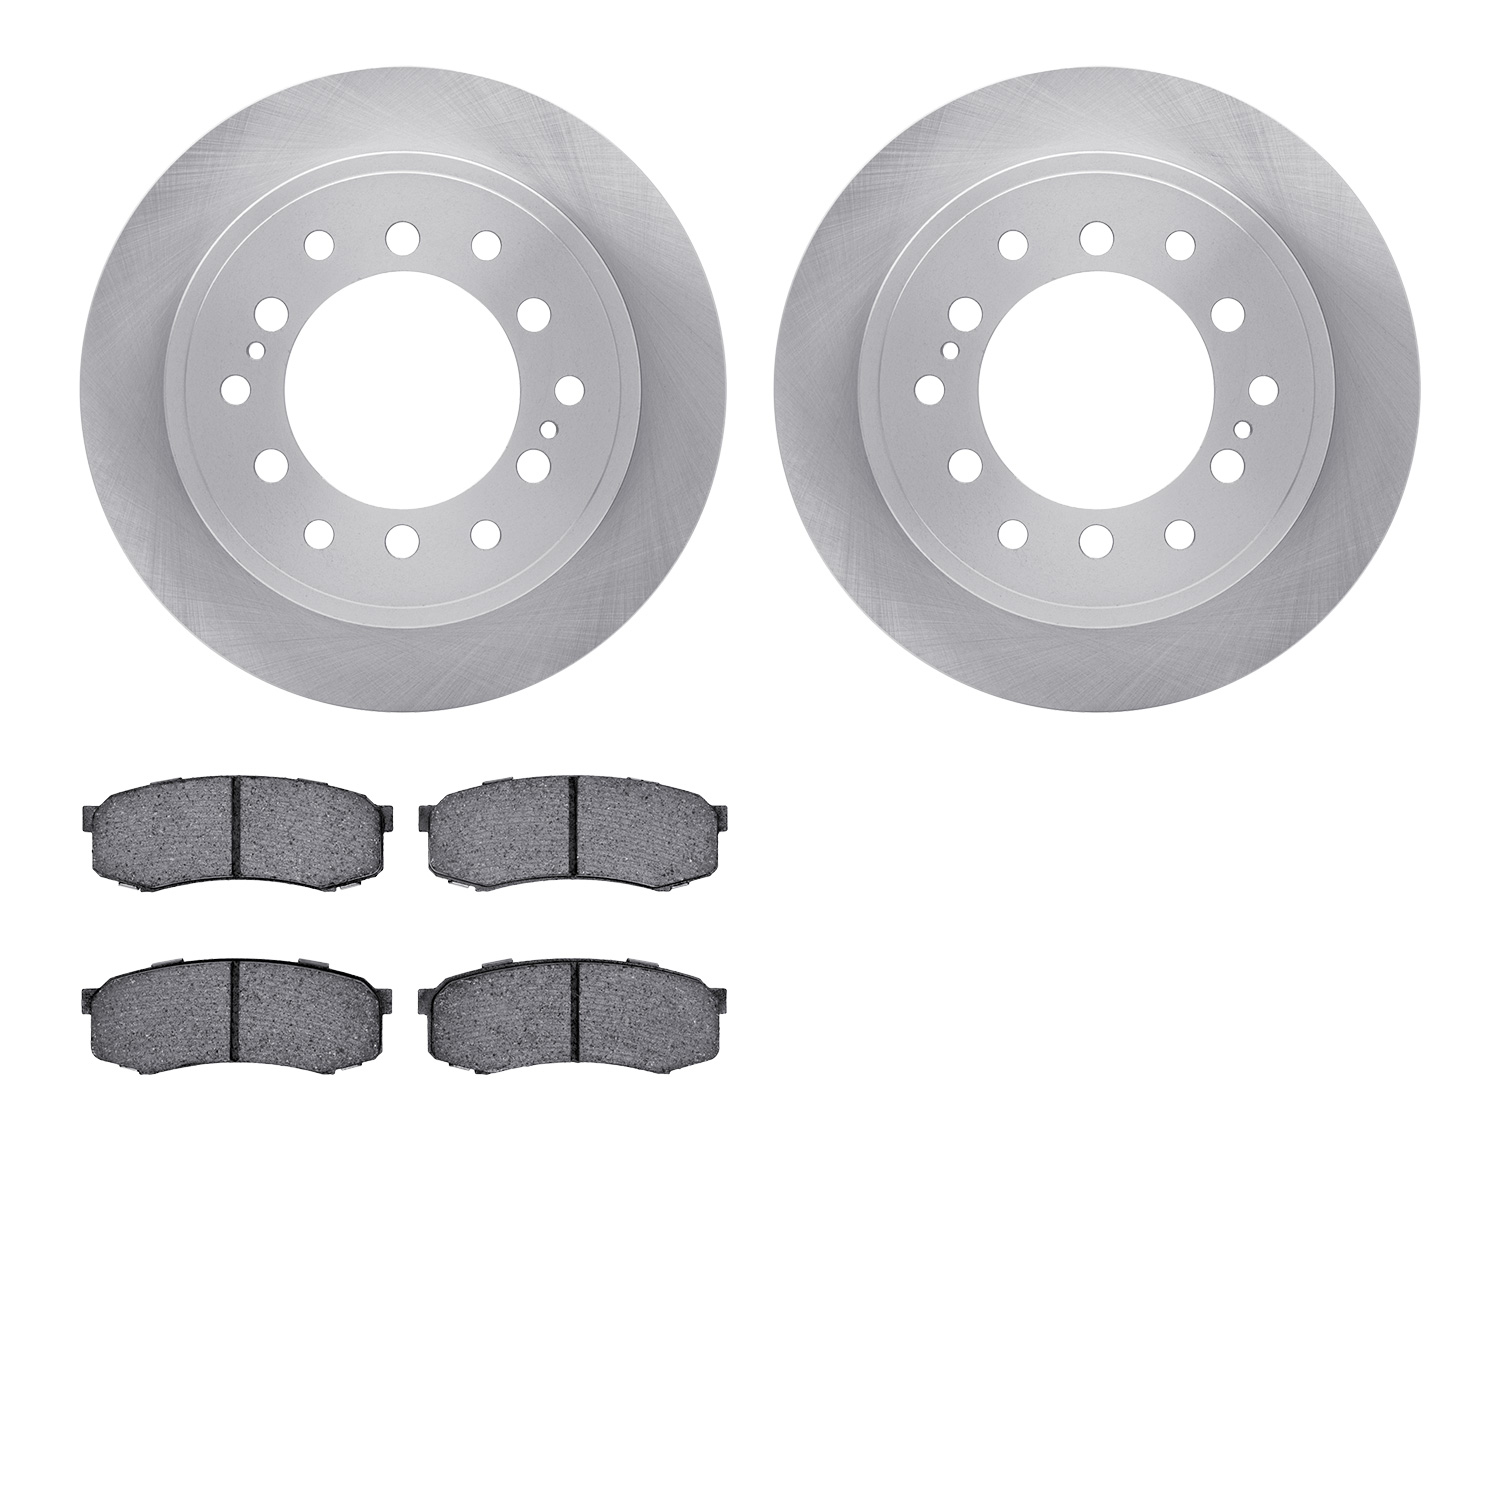 6402-76070 Brake Rotors with Ultimate-Duty Brake Pads, Fits Select Lexus/Toyota/Scion, Position: Rear